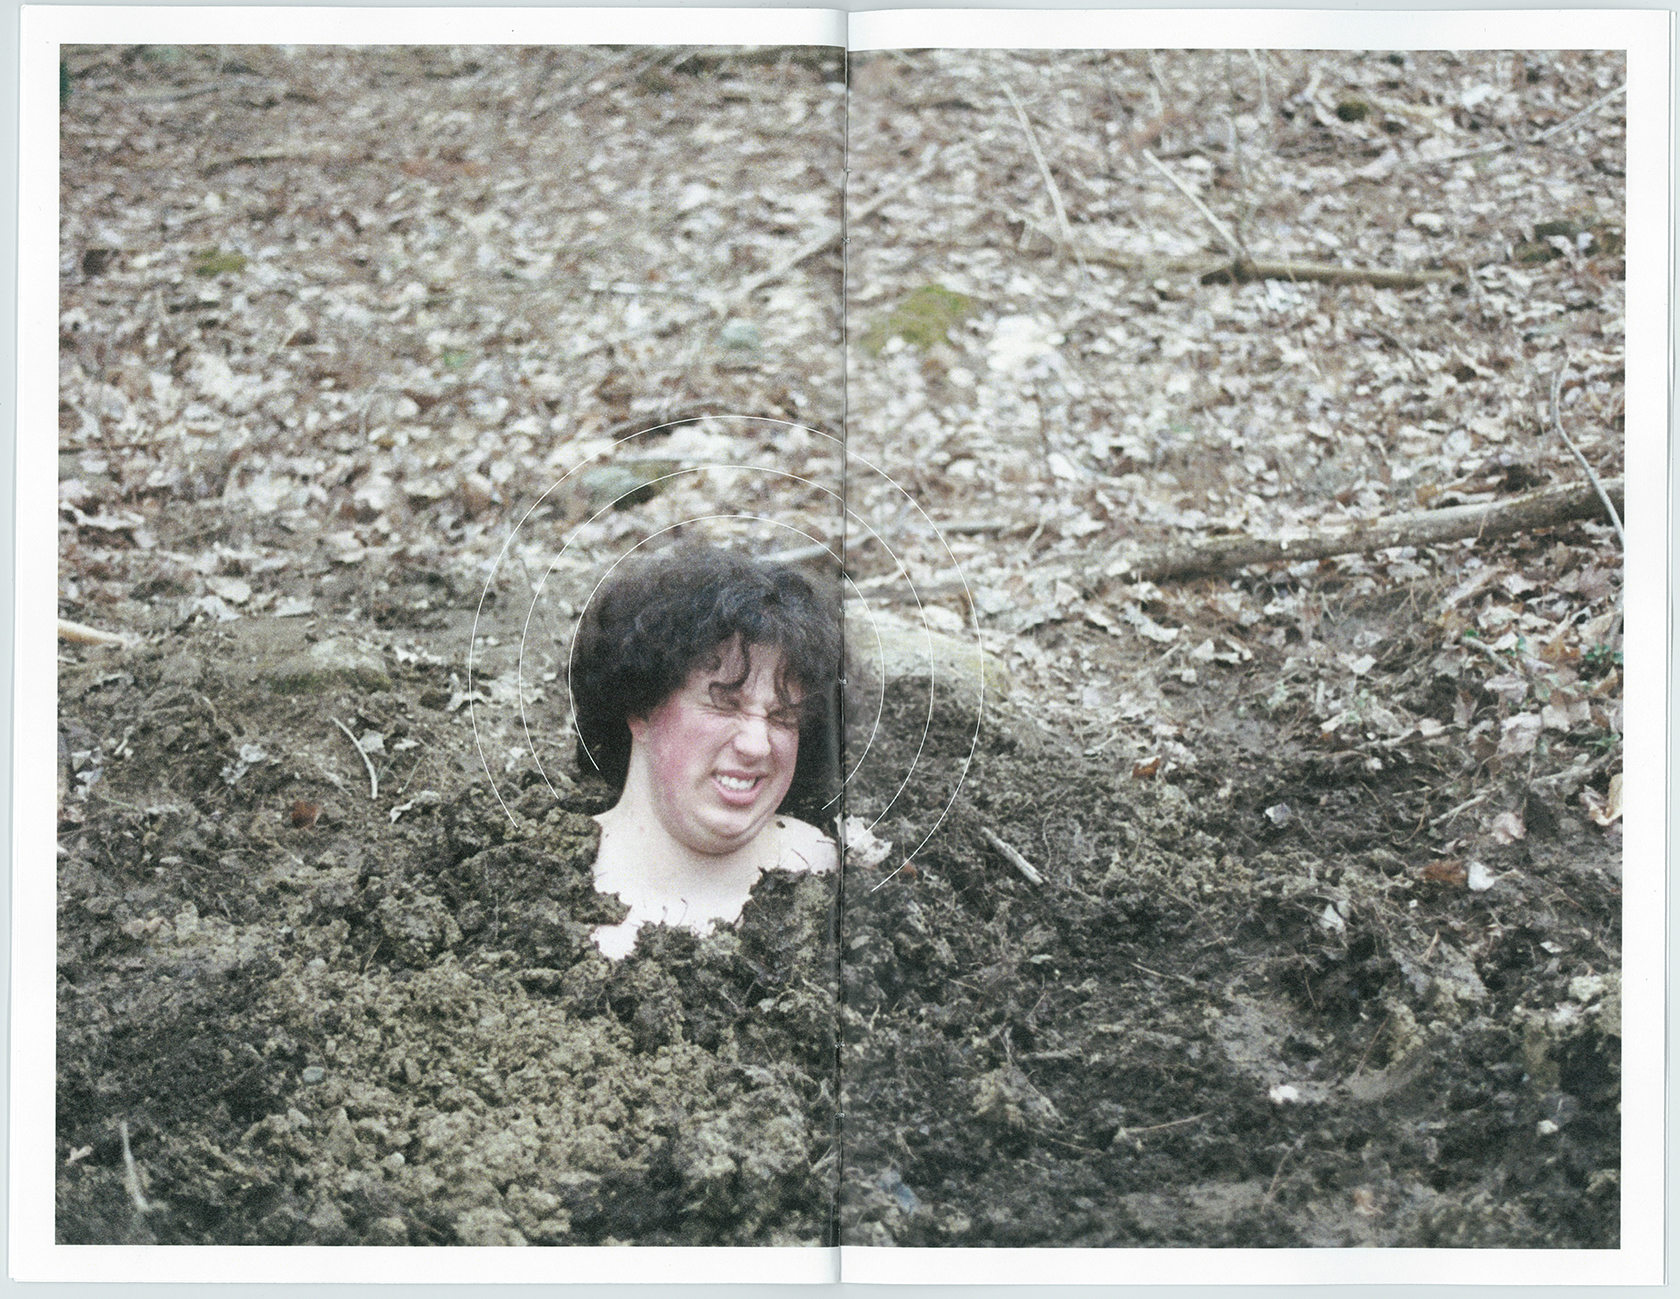 a man with curly dark brown hair is buried up to the neck in dirt. there are old, dried leaves surrounding him, he bears an expression of pain on his face. there is a set of concentric, thin, white arches surrounding his head, mirroring the style of halos from early bible paintings. the image itself is scanned out of printed book, the edges of the paper are visible around the edge of the image, along with there being a spine in the middle of the two-page spread.